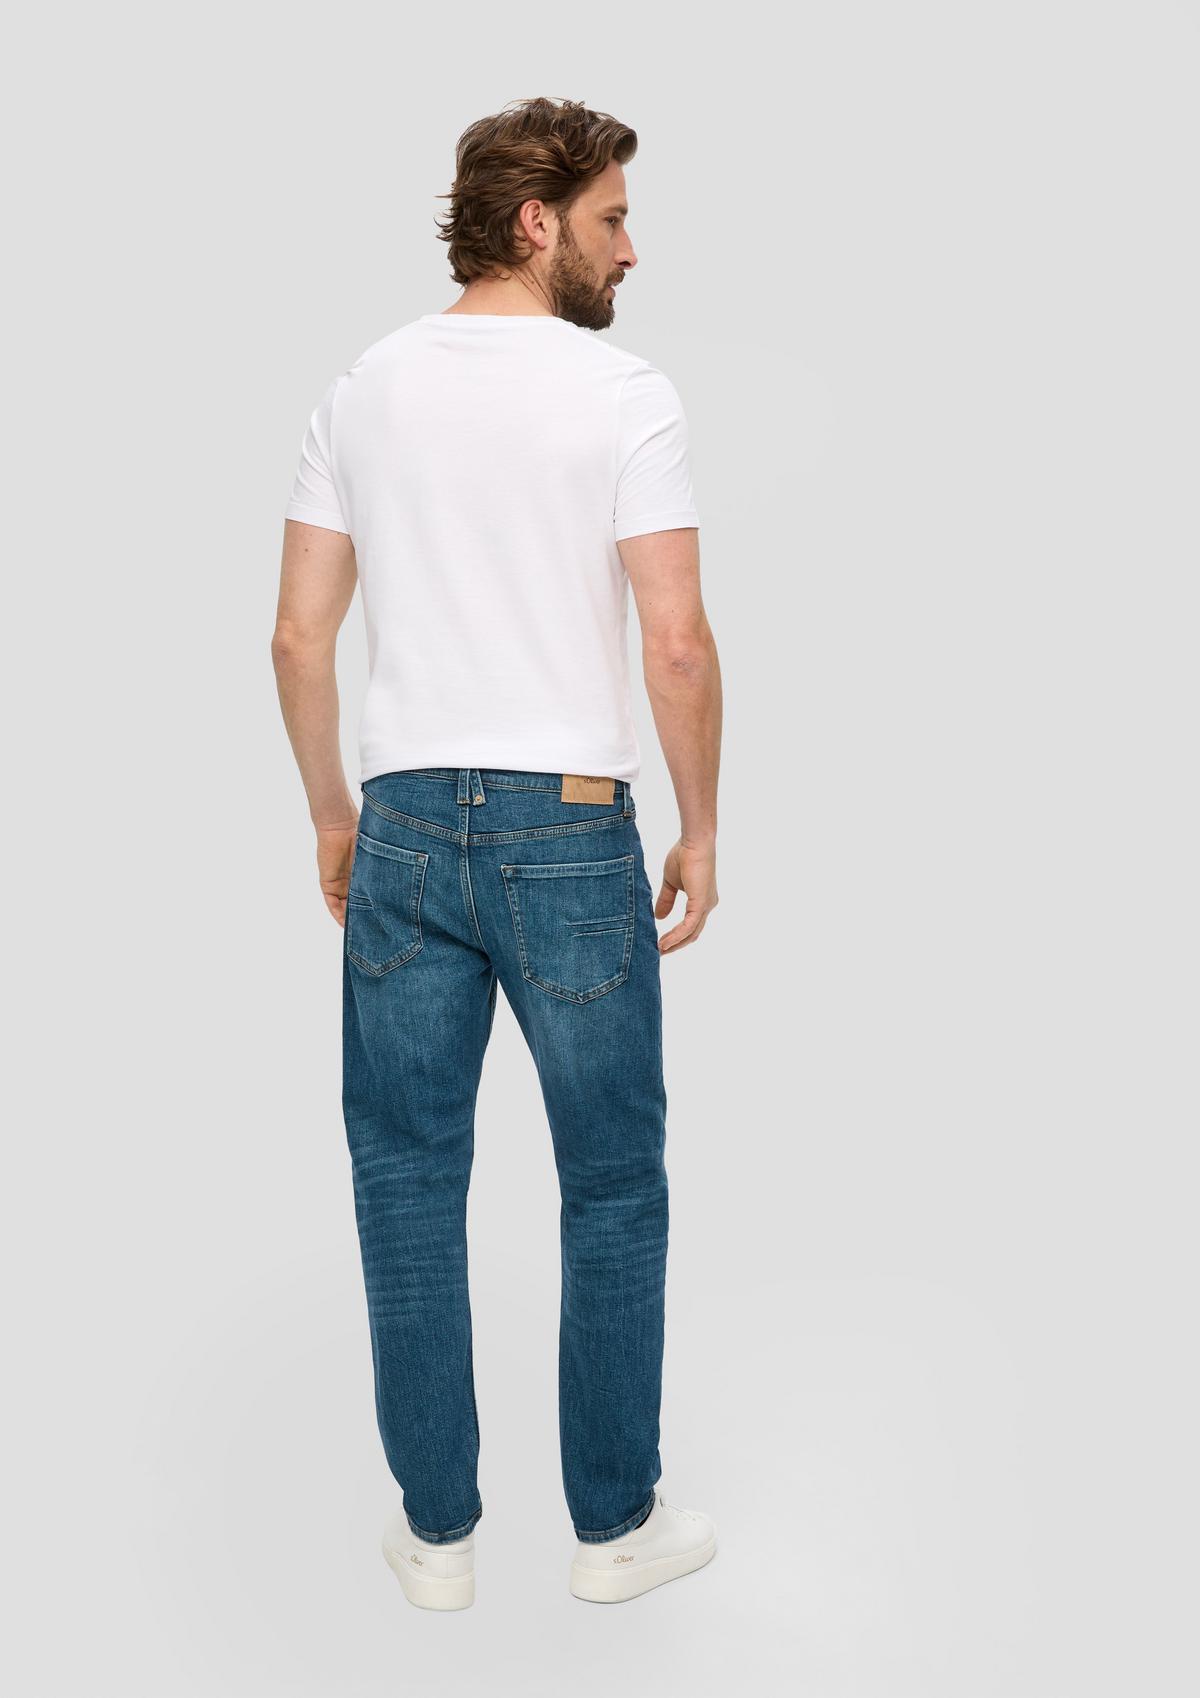 s.Oliver Mauro jeans / regular fit / high rise / tapered leg